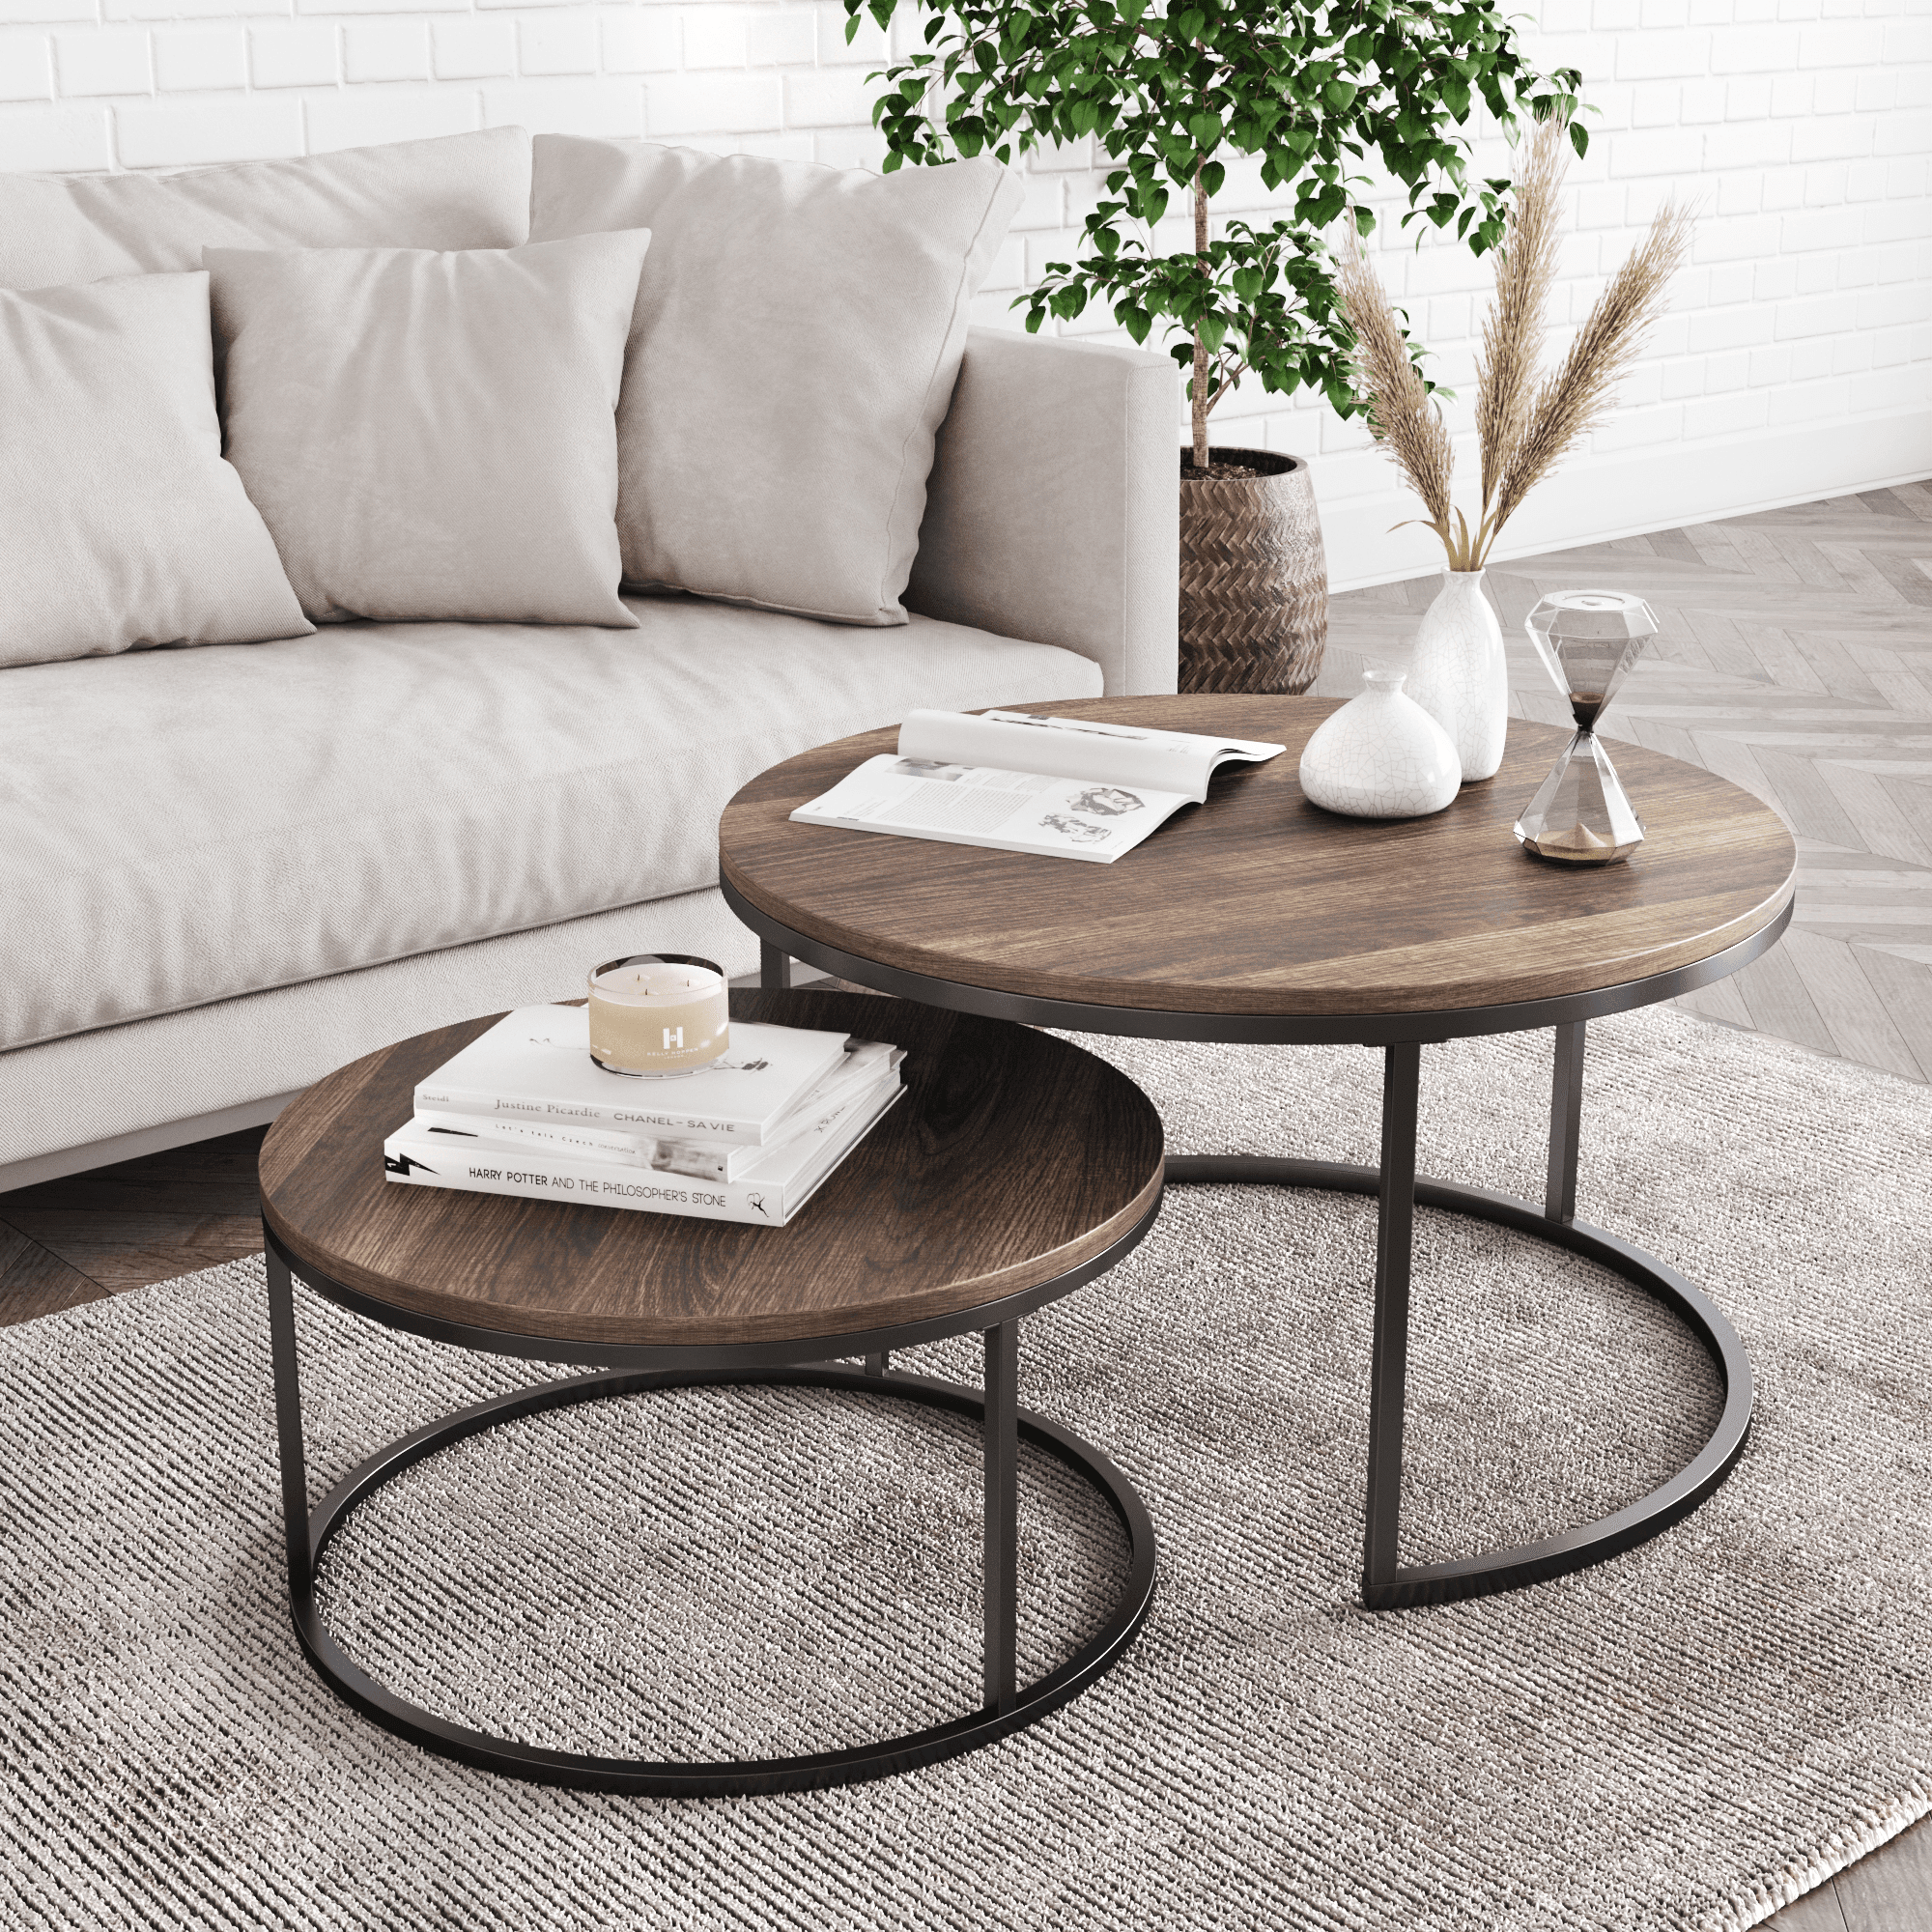 Stella Round Nesting Or Stacking Coffee Table Set Of 2 Wood Finish Intended For Round Coffee Tables (View 14 of 20)